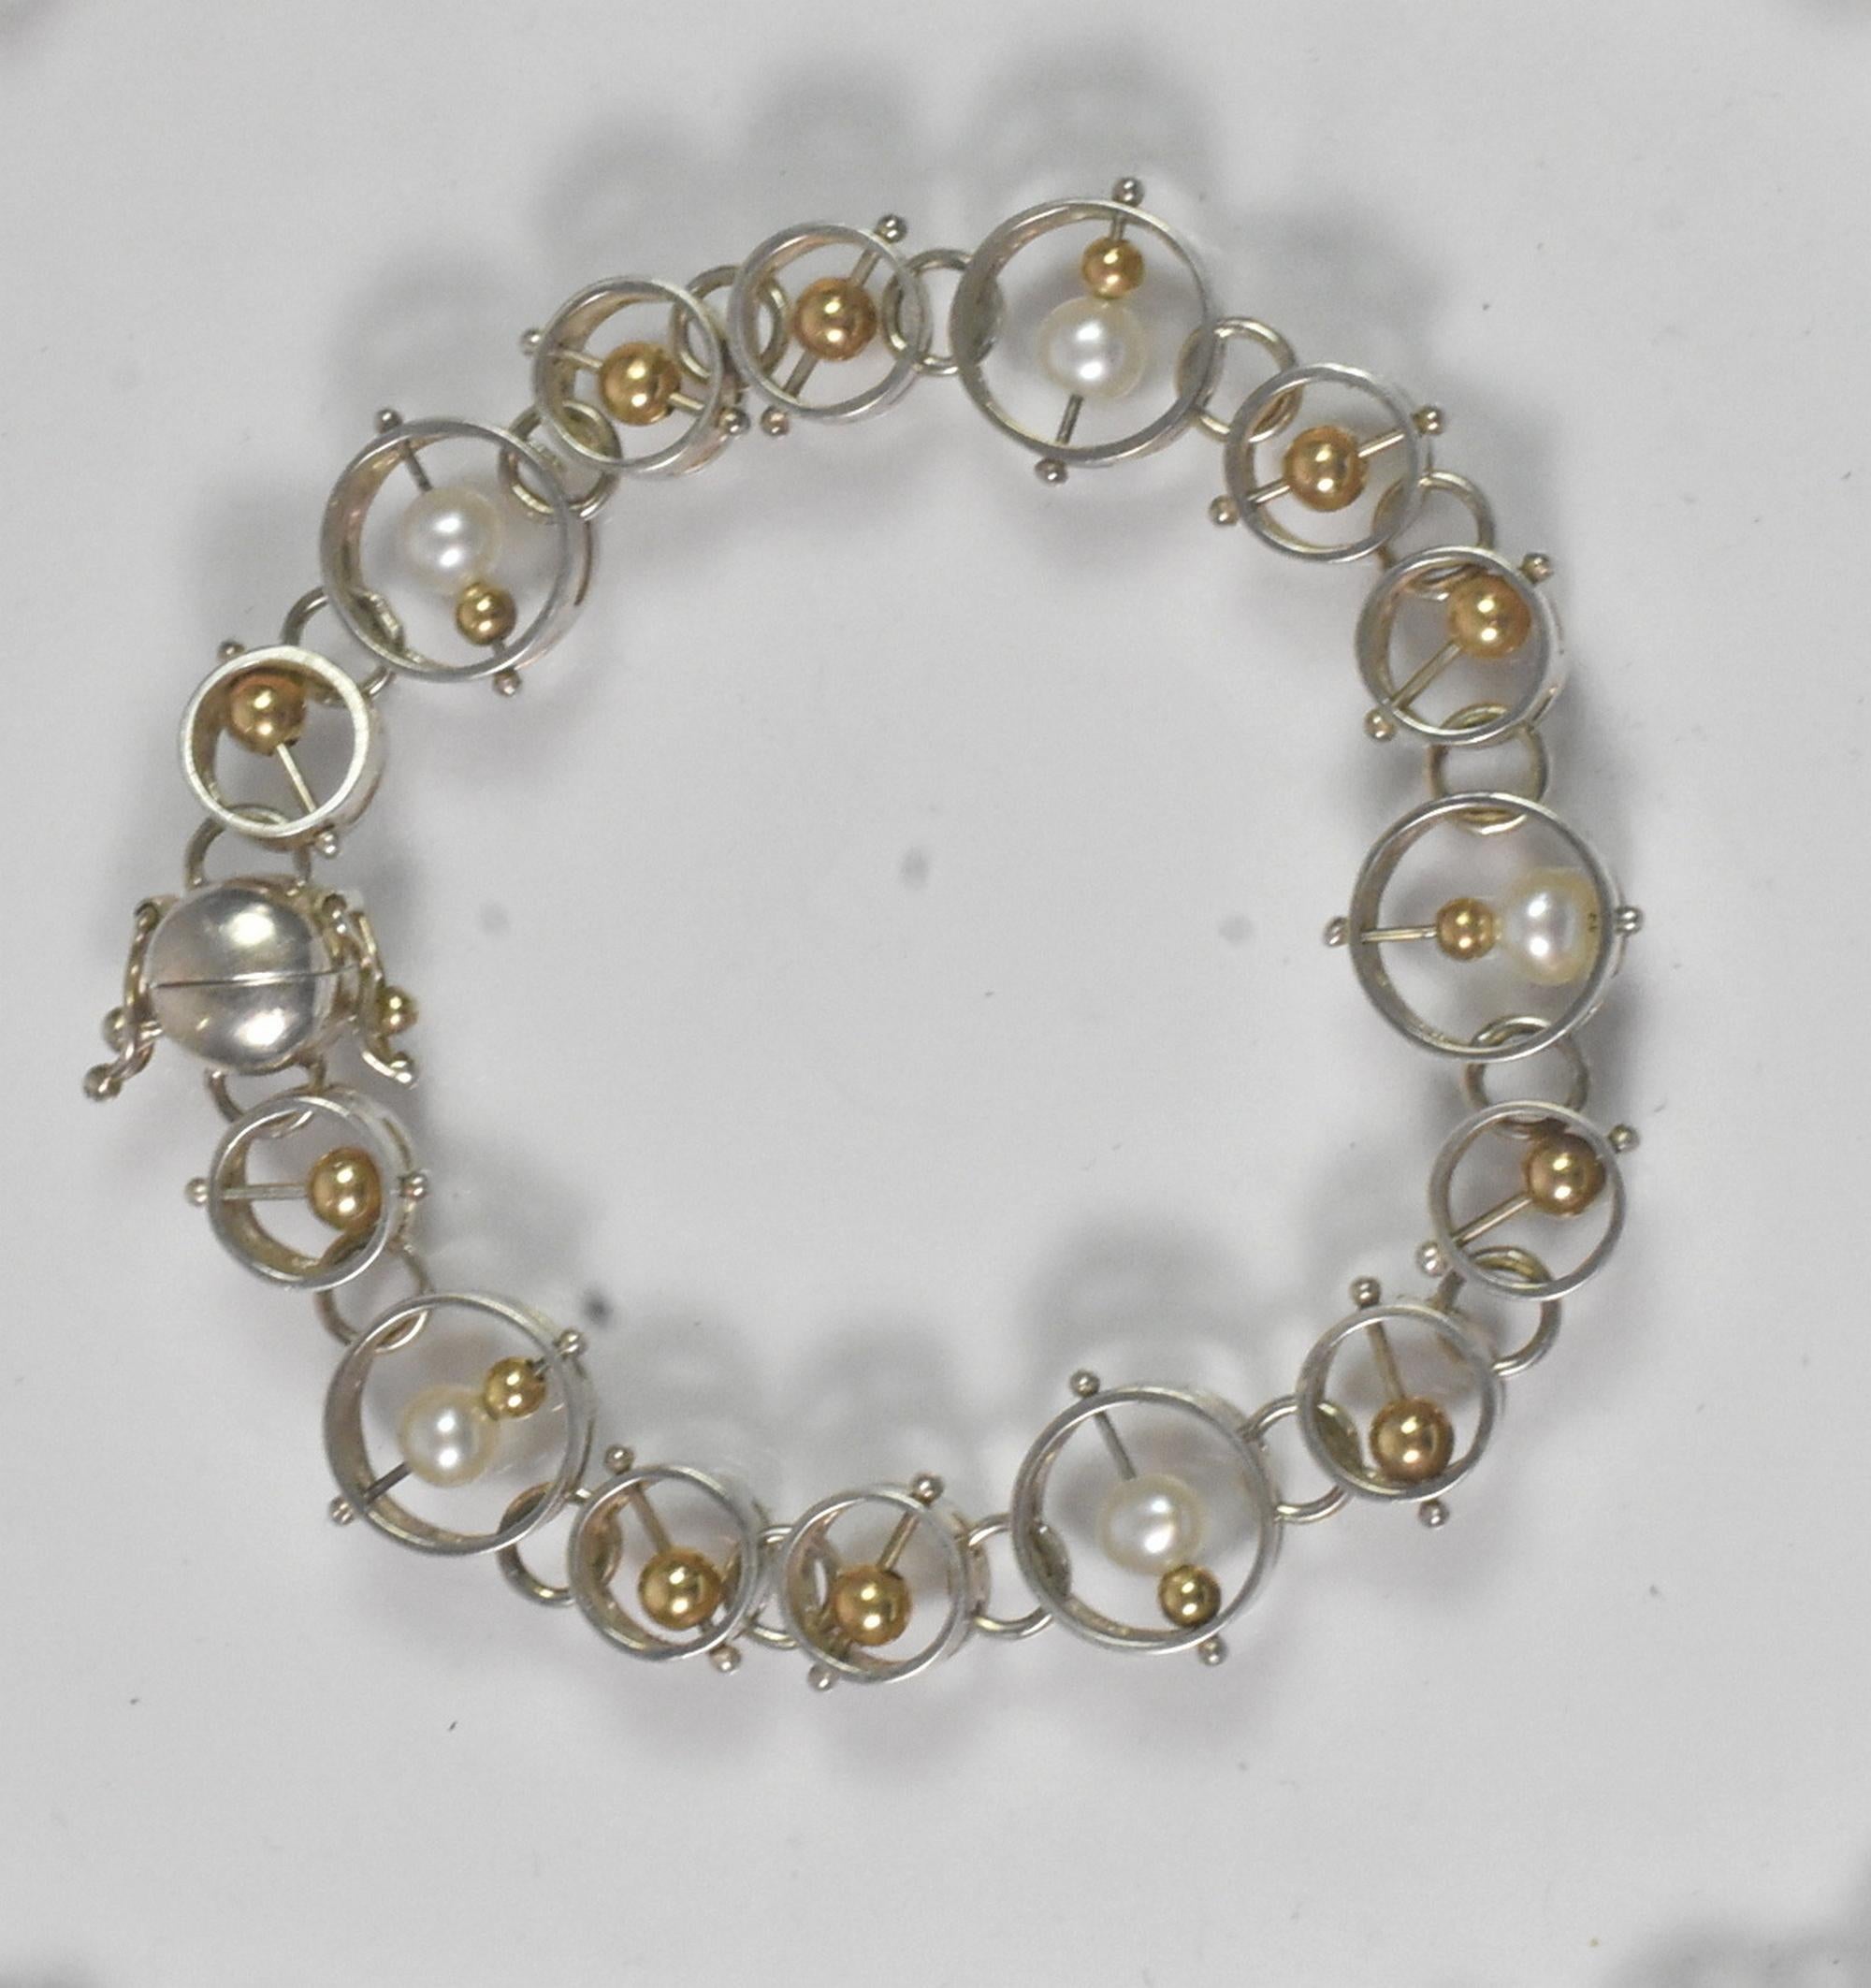 Vintage Dian Malouf (DLM) sterling & 14k gold modernist necklace & bracelet set. Rare floating 14K yellow gold beads and pearls set in circles of sterling. Bracelet held with a magnet and locking clasps. Great condition in a unique look. Hallmark